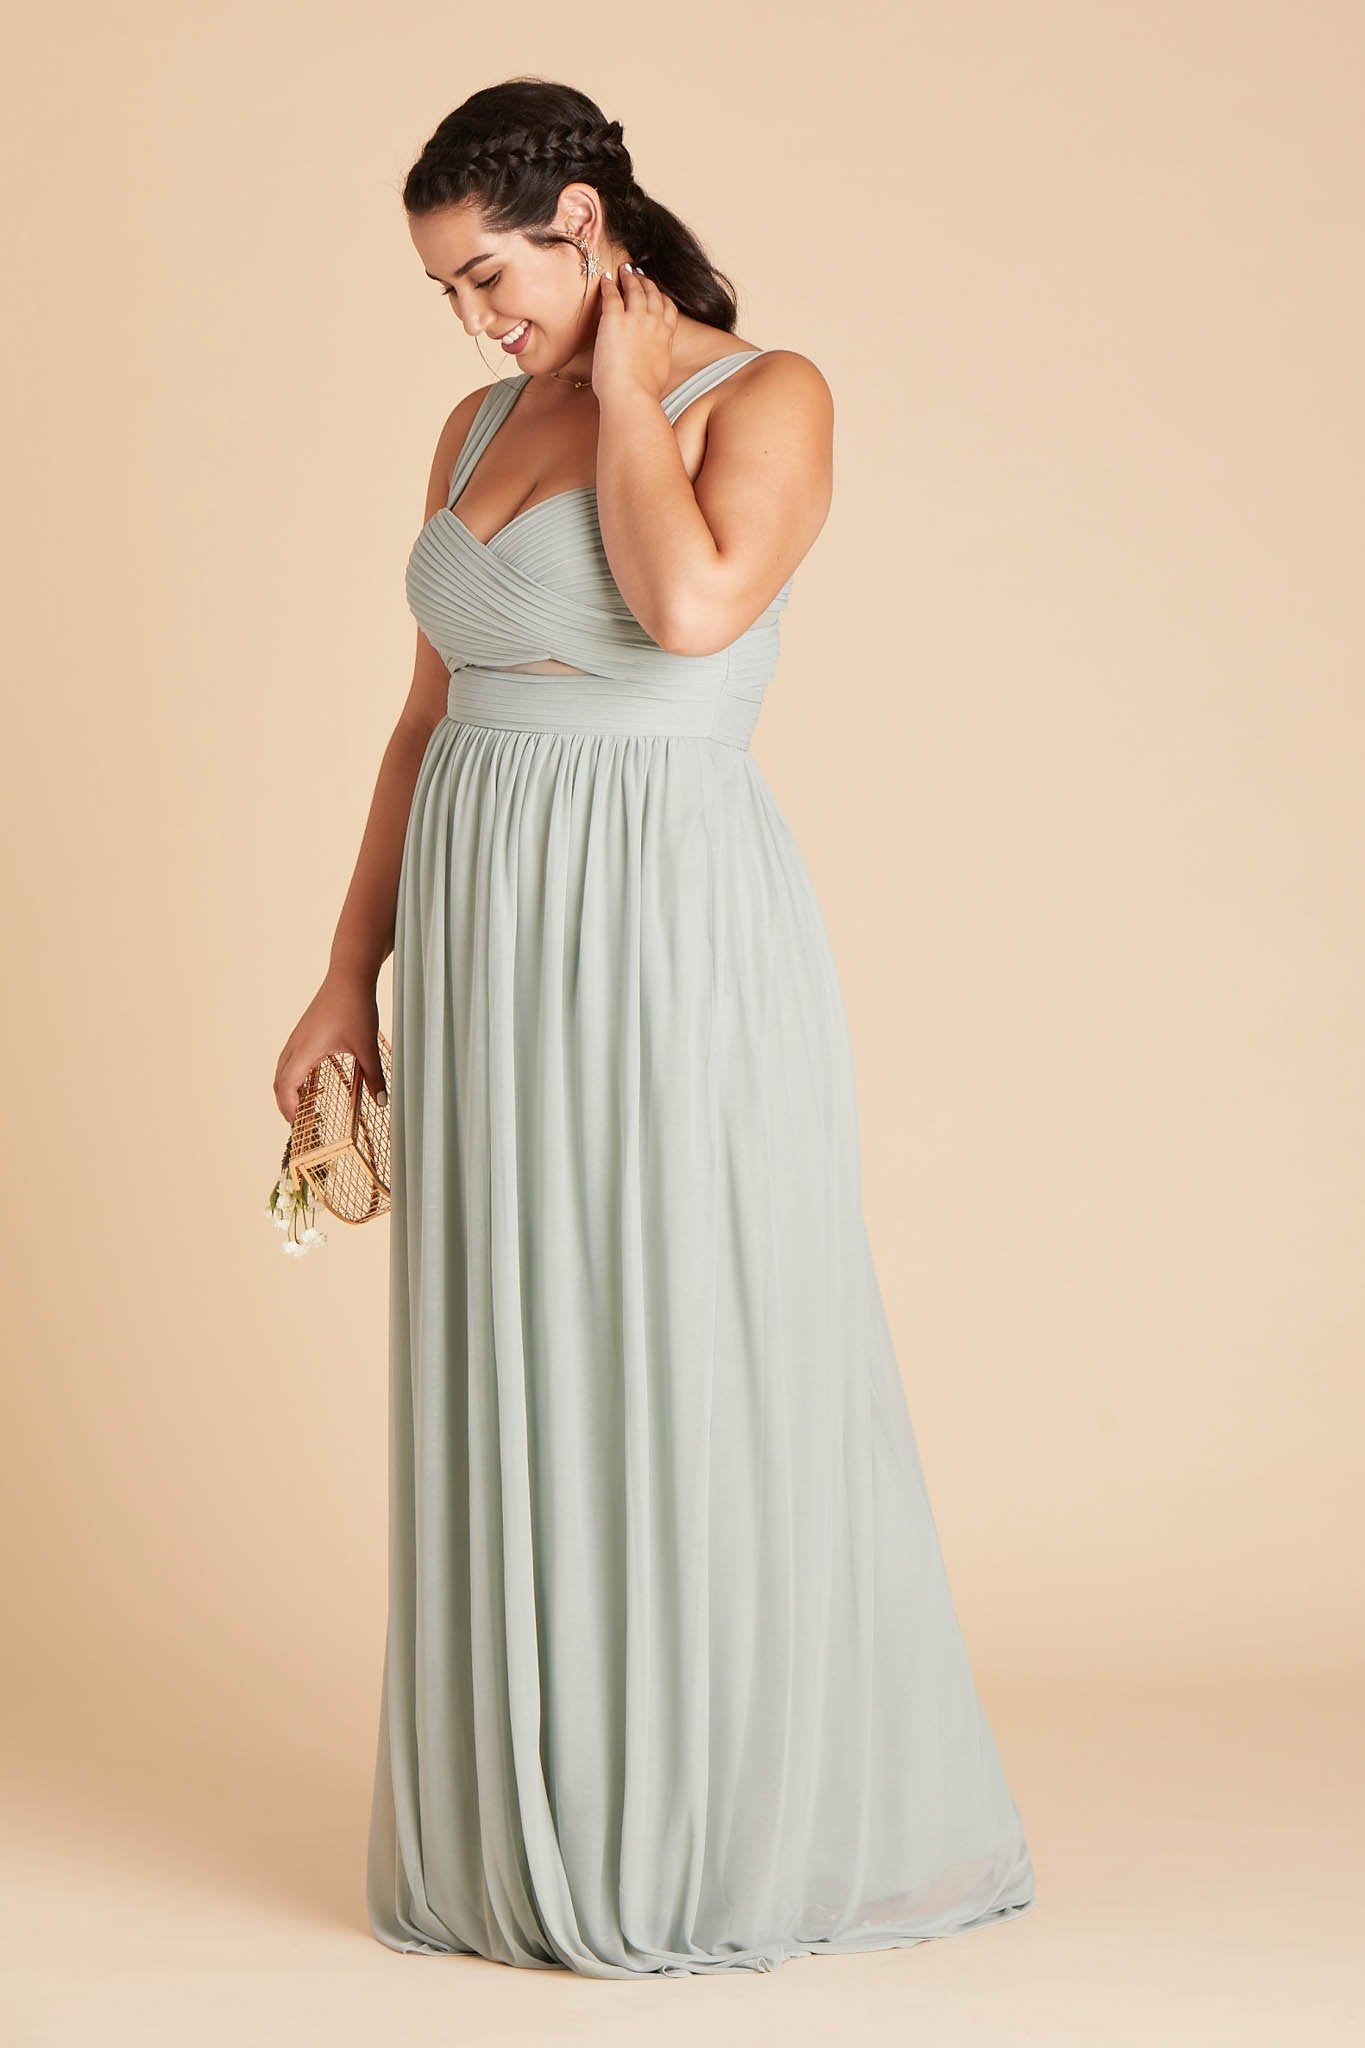 Front view of the Elsye Plus Size Bridesmaid Dress in sage mesh features a fitted bust and waist with peekaboo cutouts showing a hint of skin at the waist.